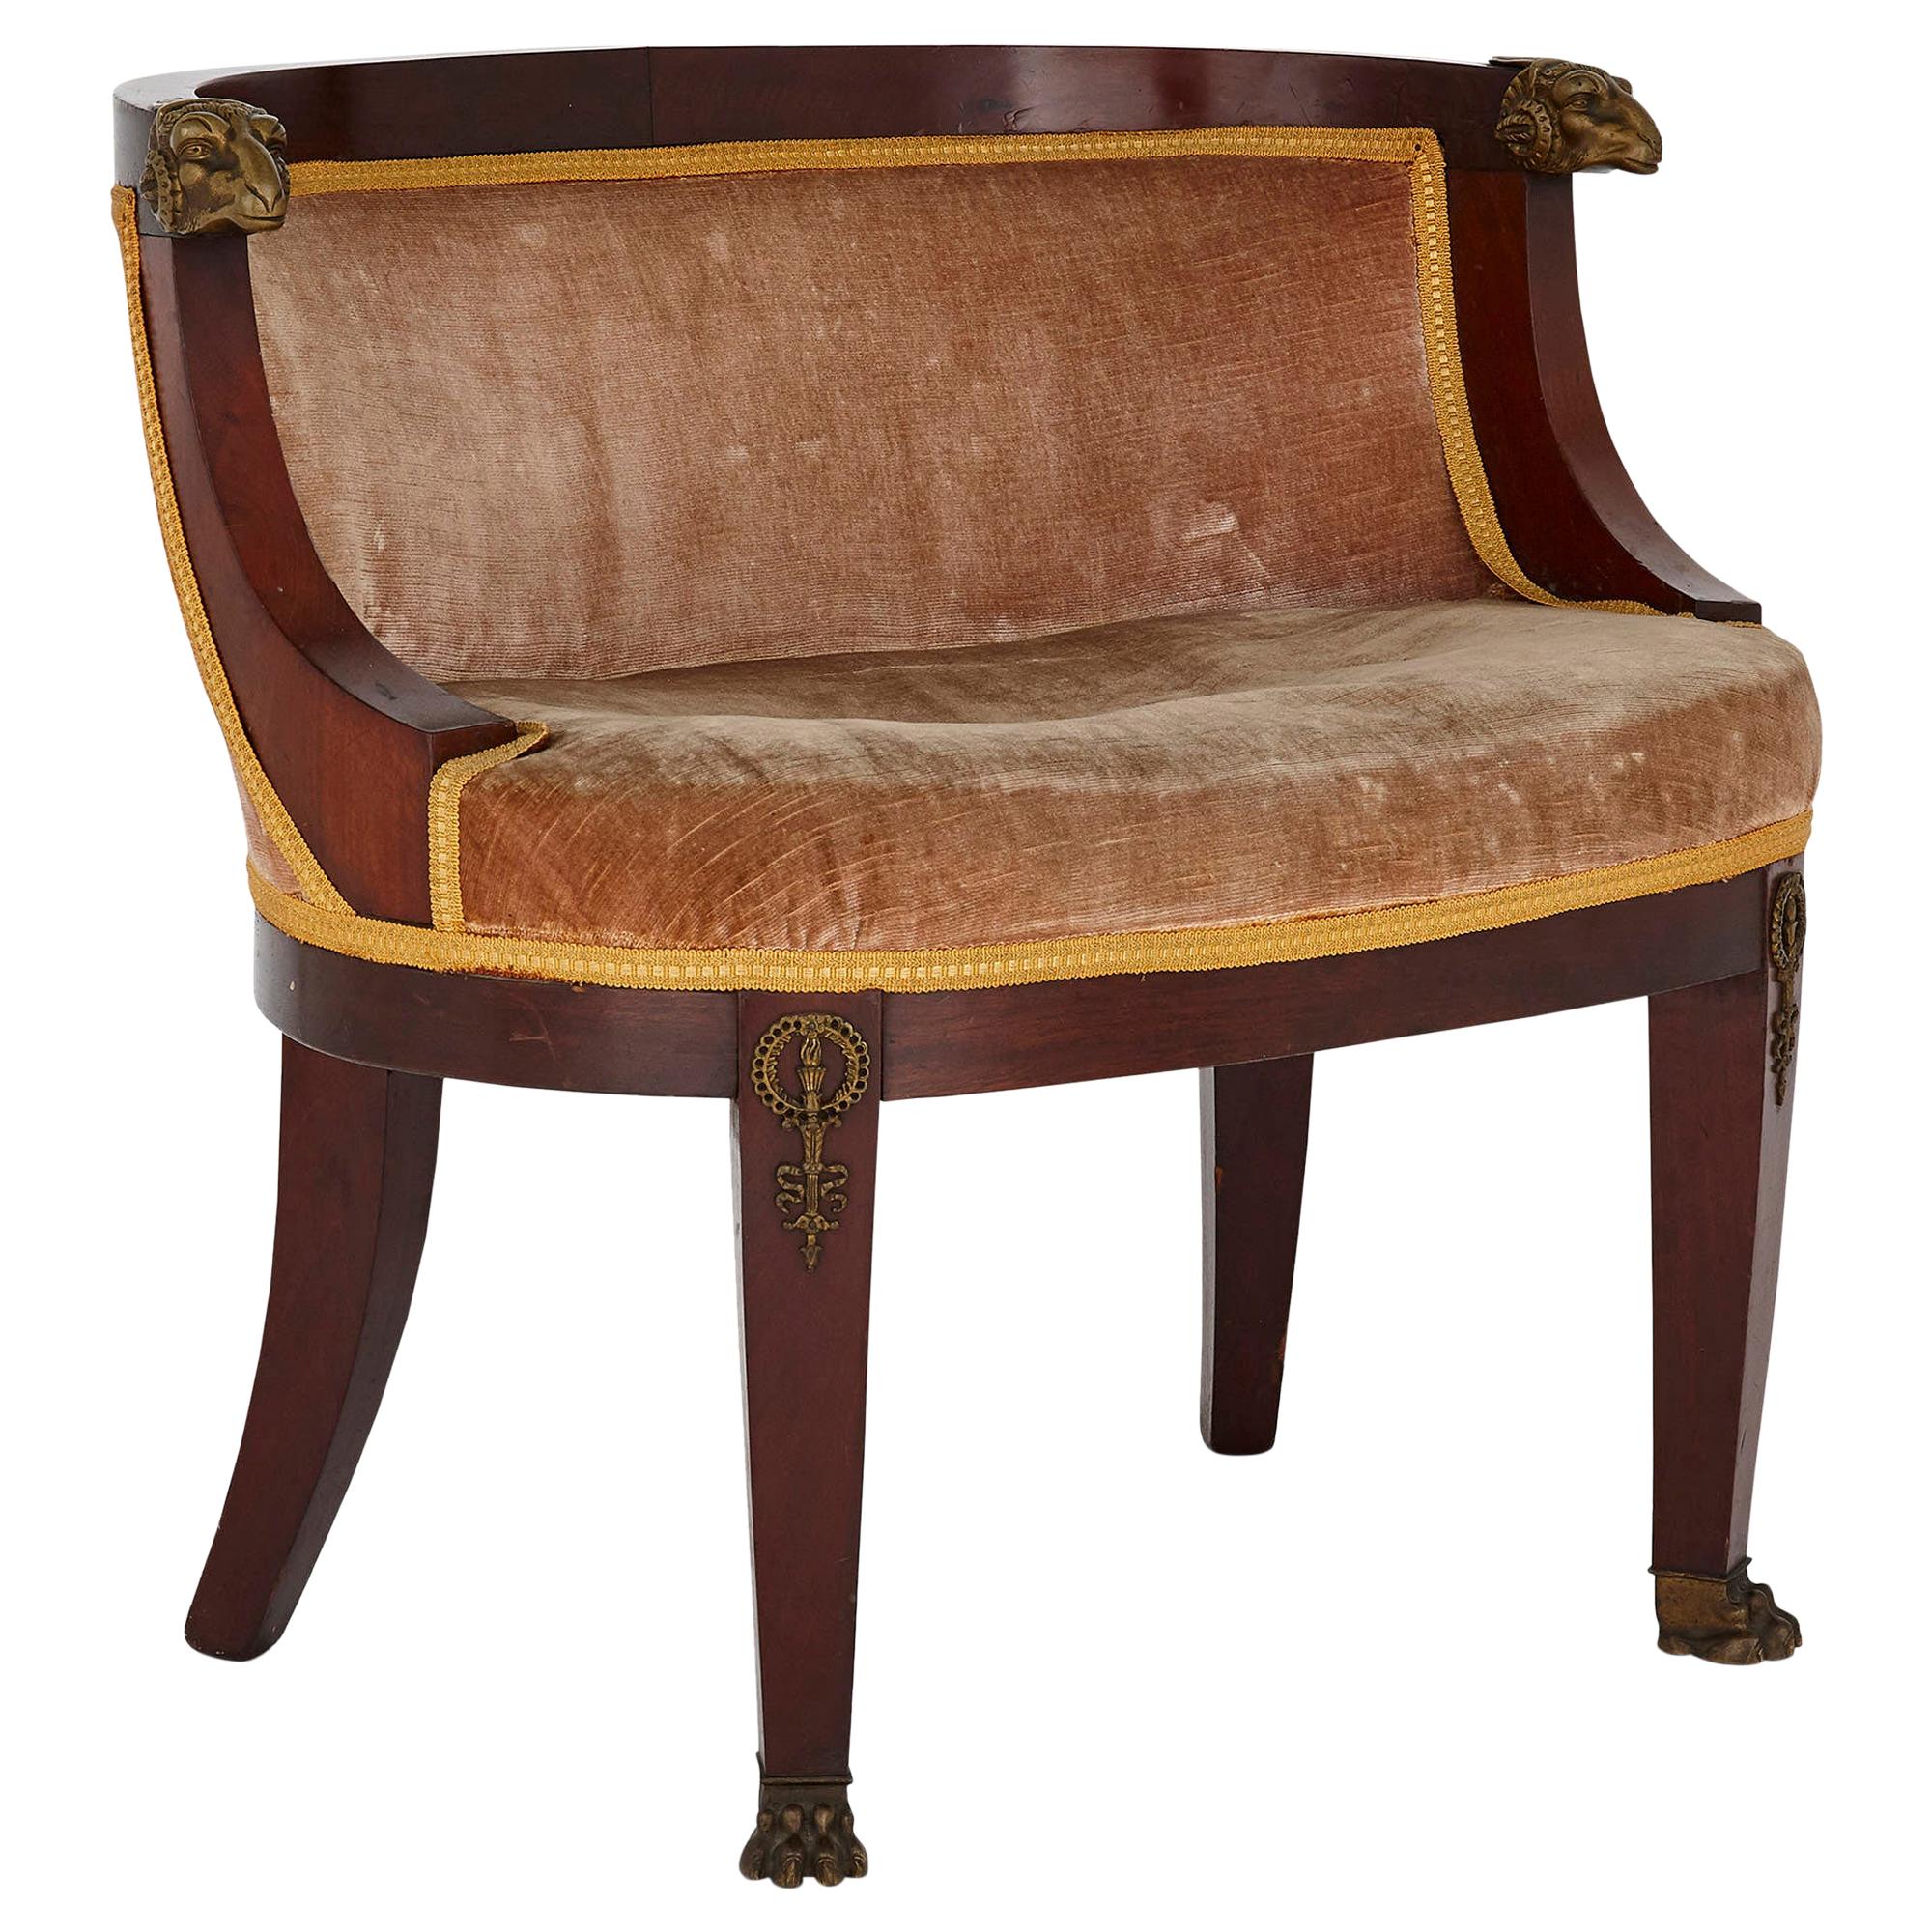 Antique French Empire Style Armchair